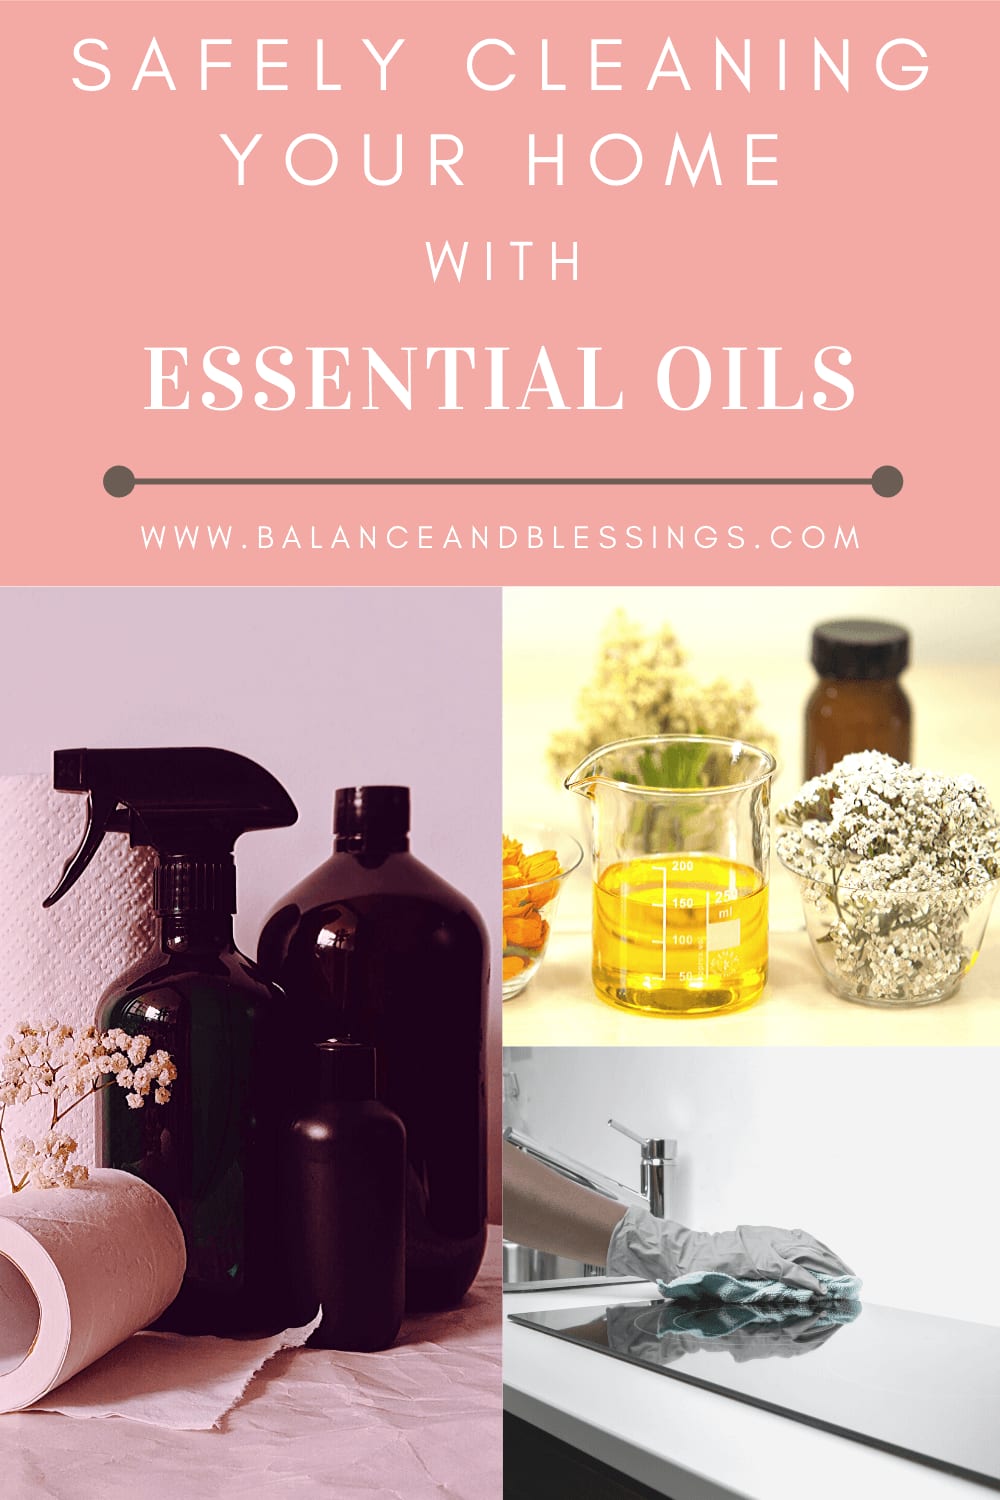 Safely Cleaning Your Home with Essential Oils - Balance & Blessings